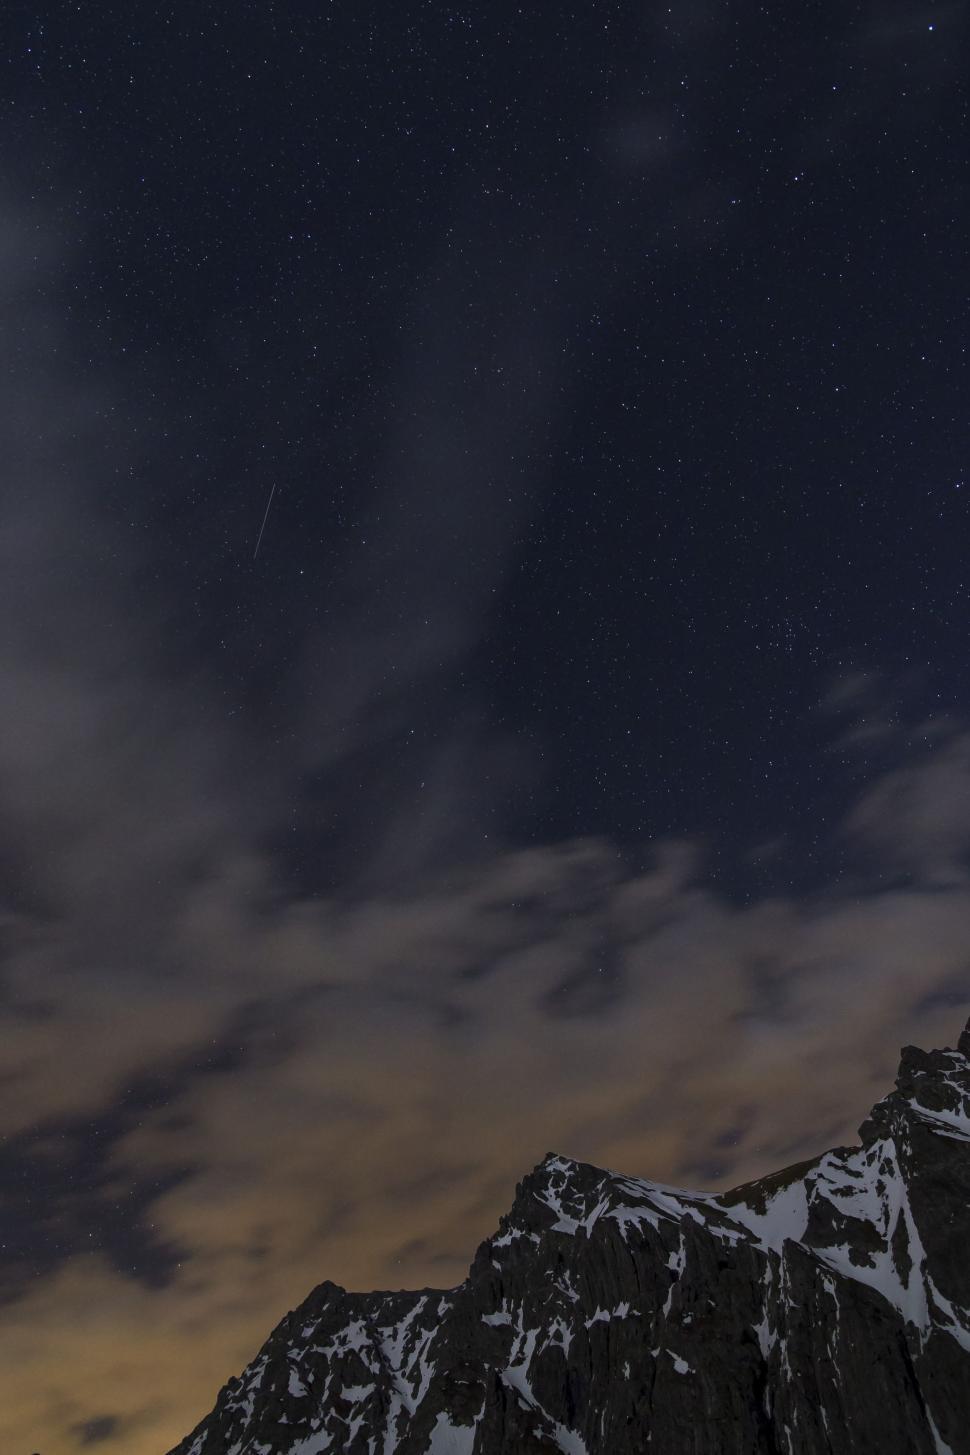 Free Image of Night Sky With Stars and Clouds Over a Mountain 